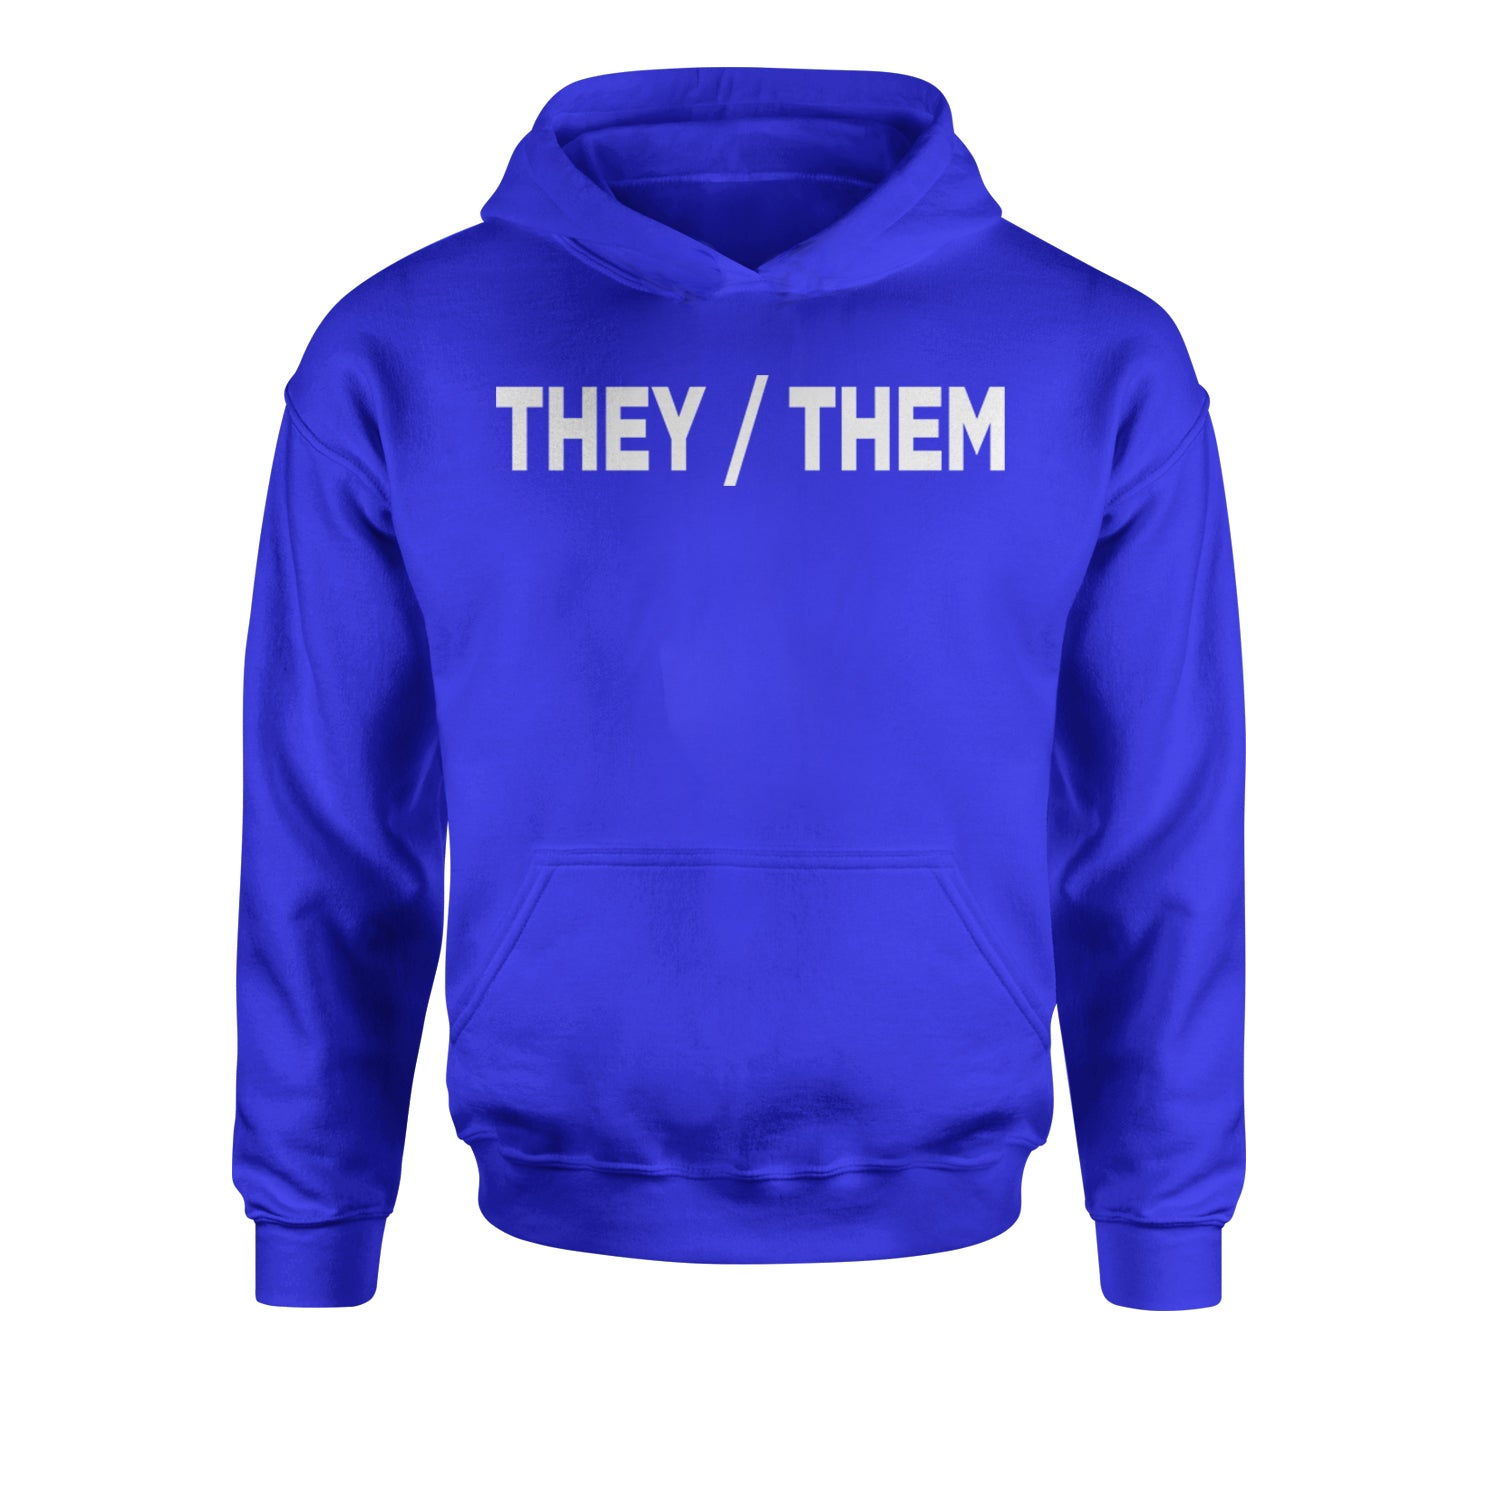 They Them Gender Pronouns Diversity and Inclusion Youth-Sized Hoodie binary, civil, gay, he, her, him, nonbinary, pride, rights, she, them, they by Expression Tees